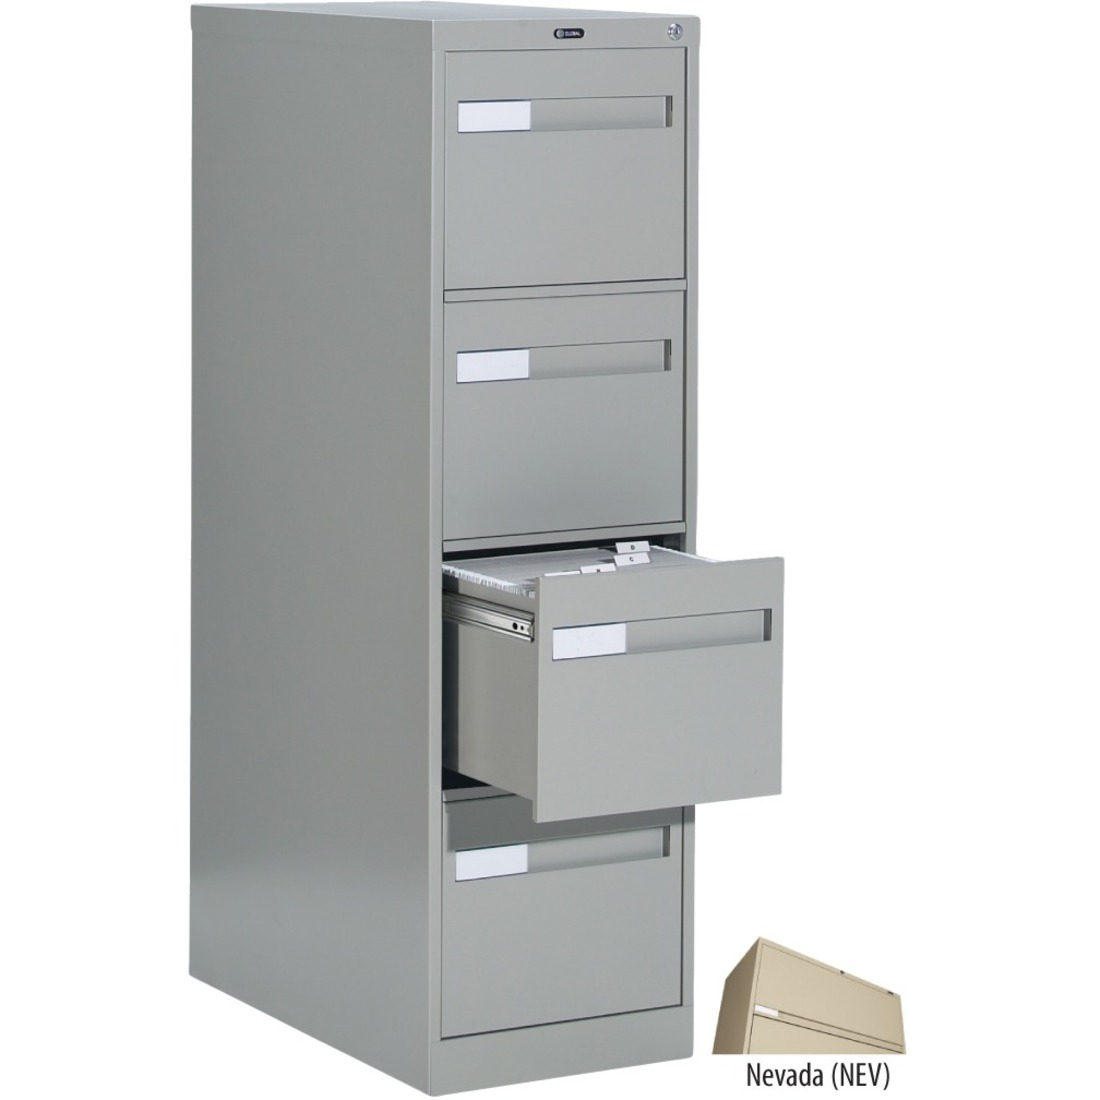 Global 2600 Plus Vertical File Cabinet Glb26402nv in sizing 1100 X 1100